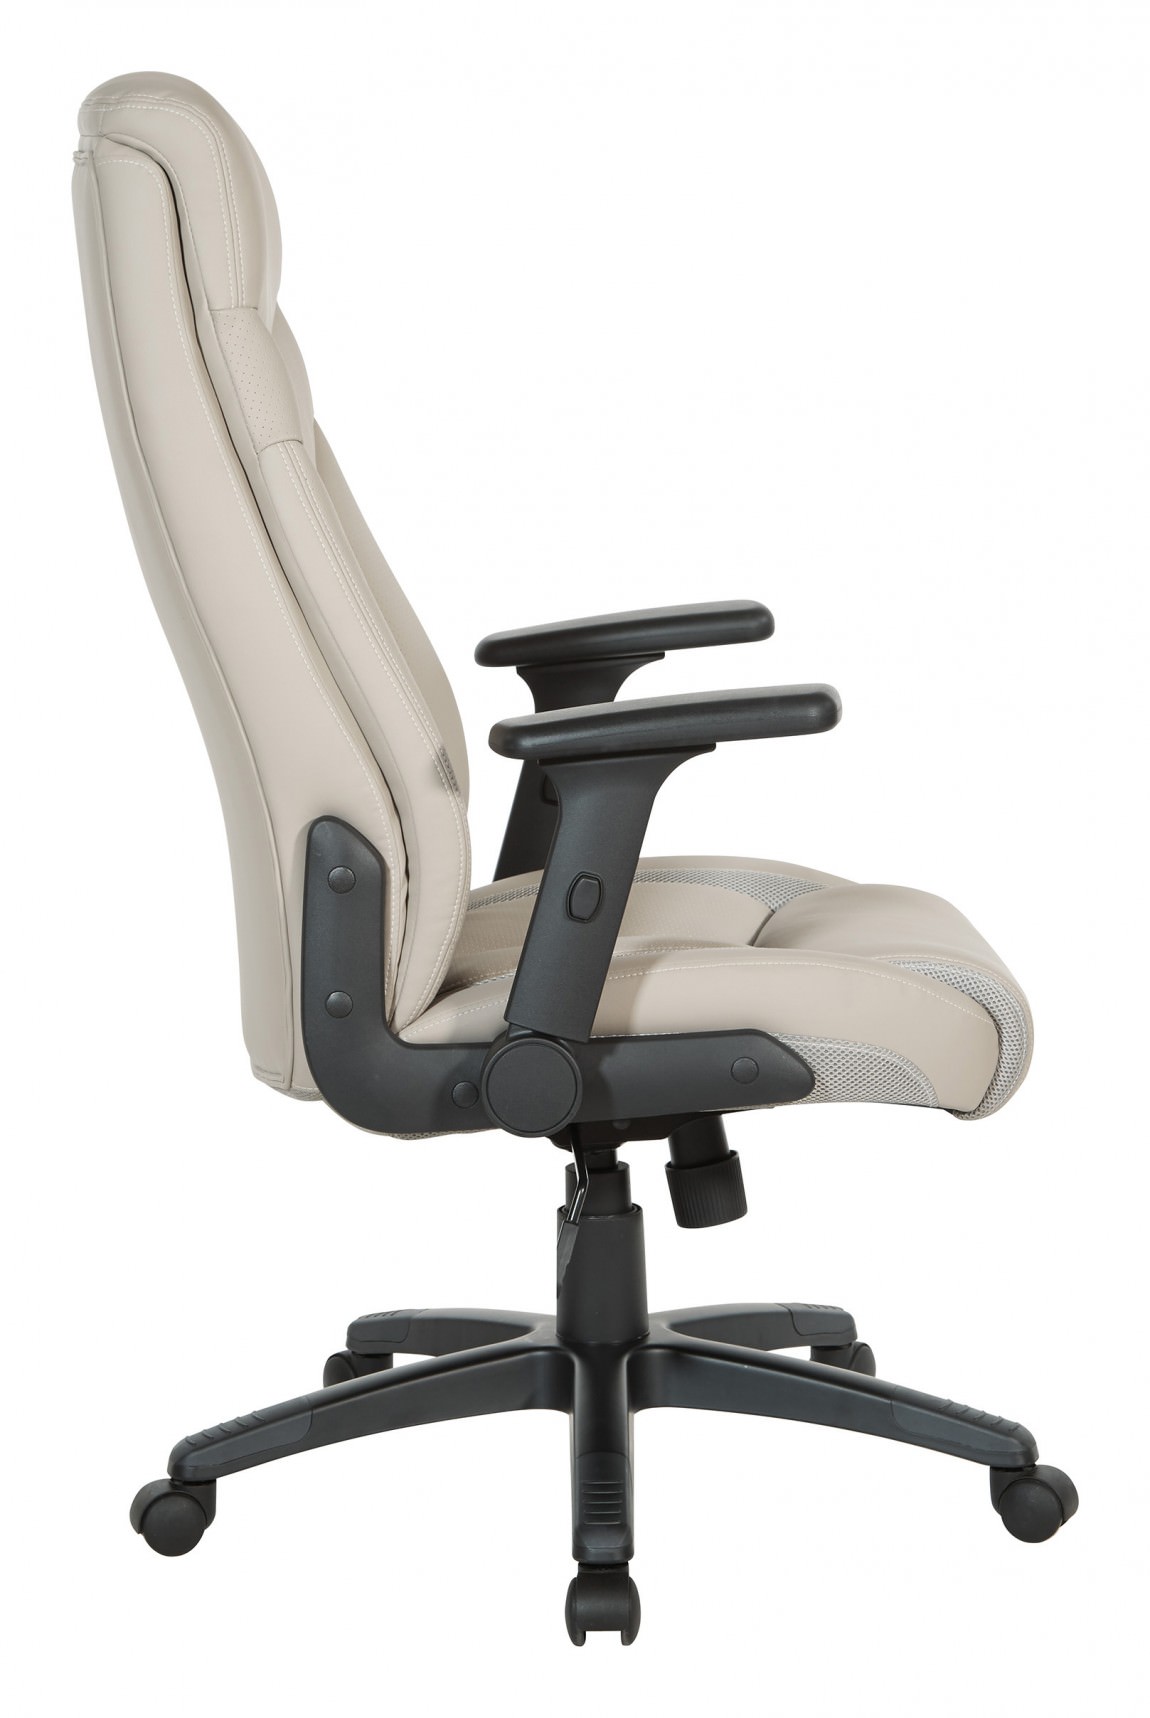 Executive High Back Leather Chair